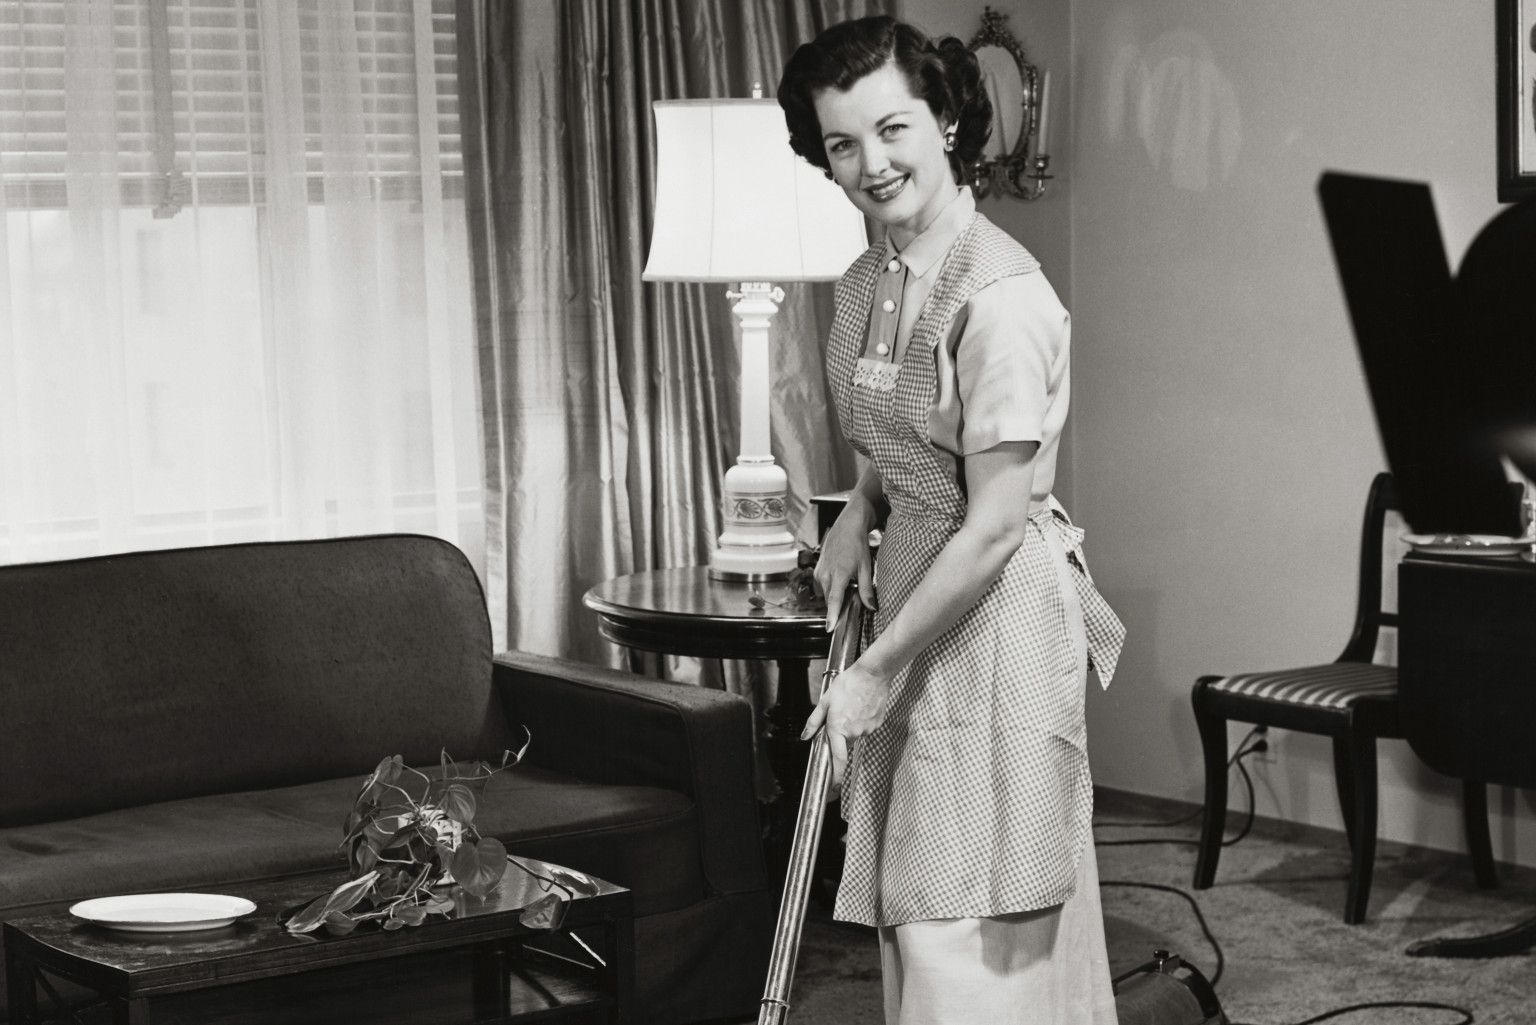 Check out this 1950’s Daily Cleaning Routine